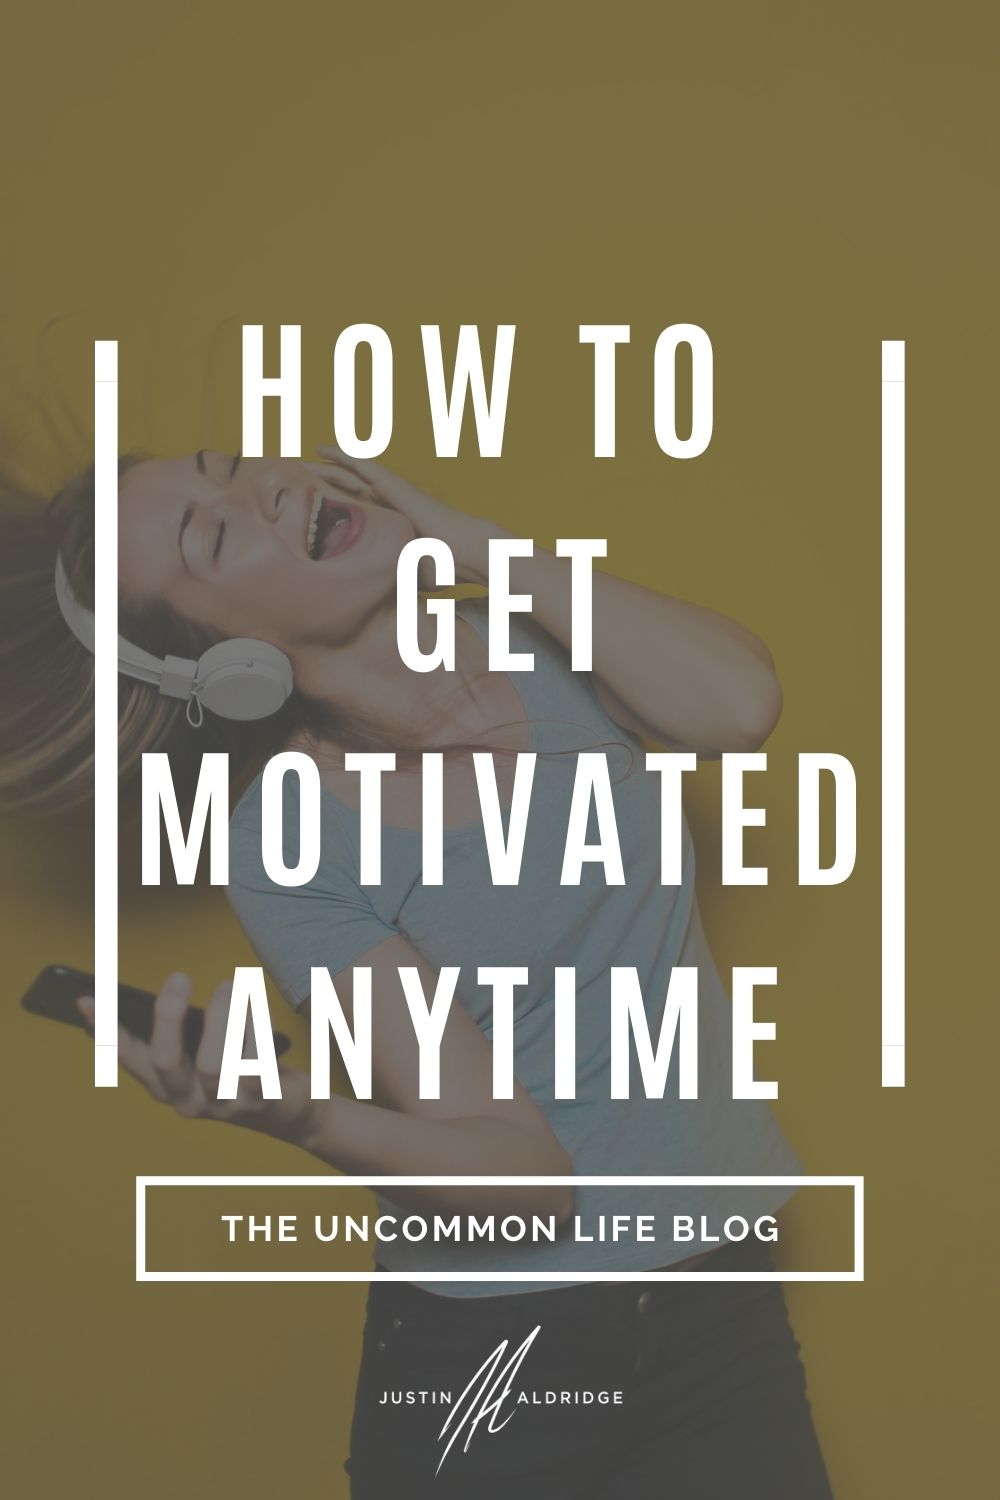 Woman listening to music in the background behind the text, “How to get motivated anytime”